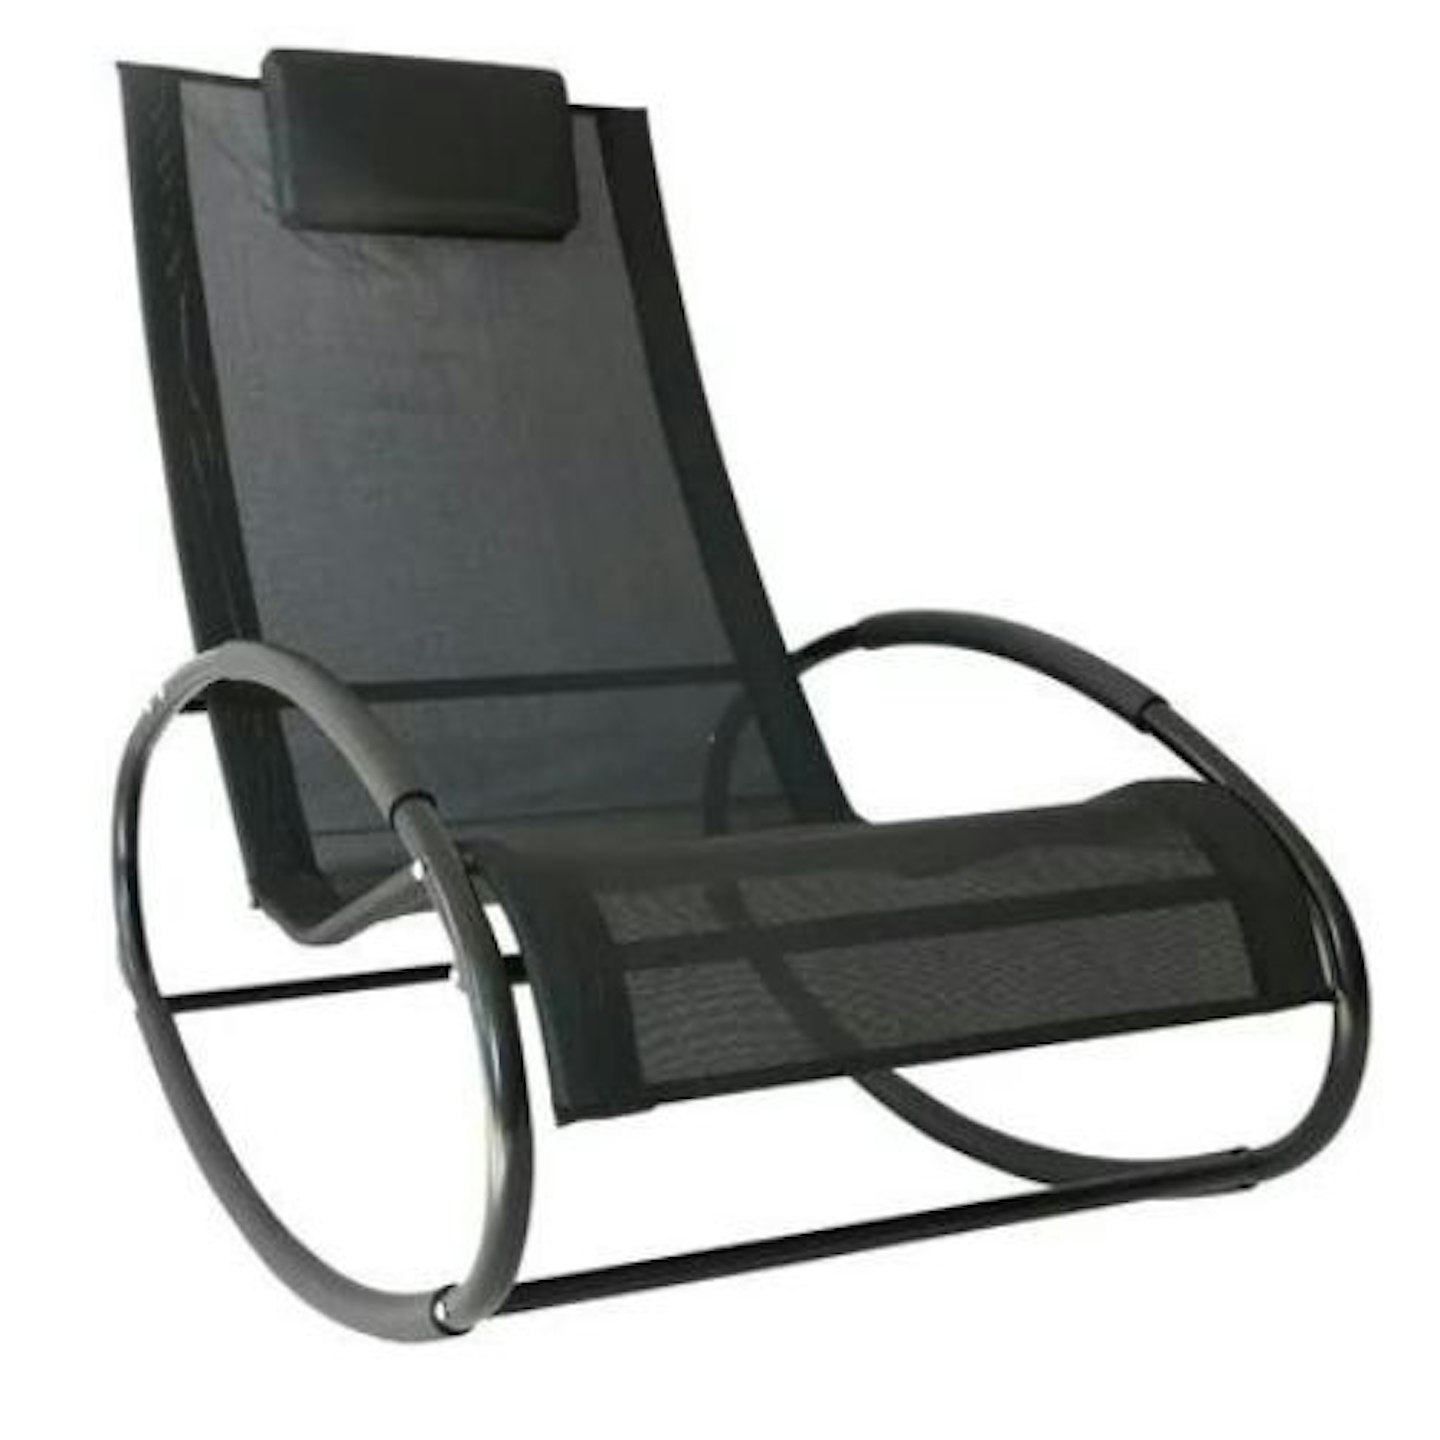 Outdoor Aalicia Rocking Chair